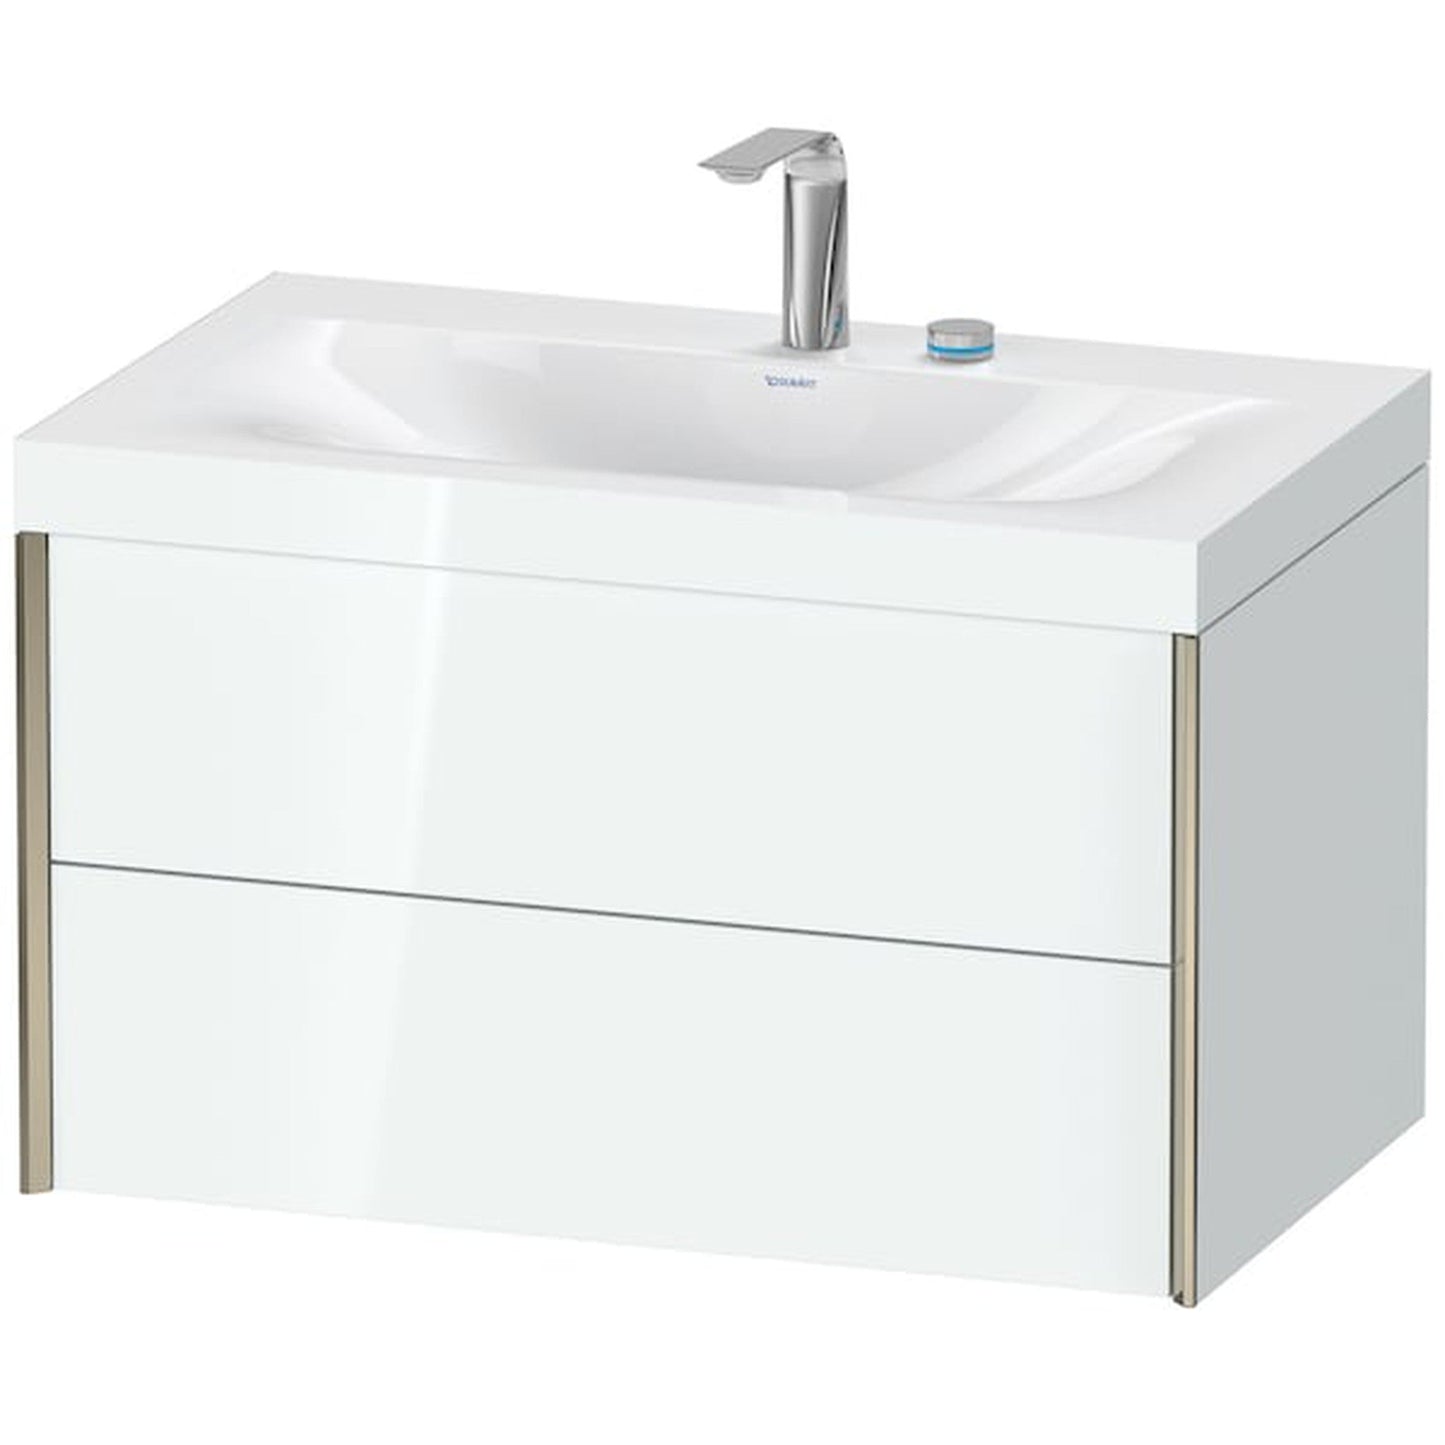 Duravit Xviu 31" x 20" x 19" Two Drawer C-Bonded Wall-Mount Vanity Kit With Two Tap Holes, White (XV4615EB185C)